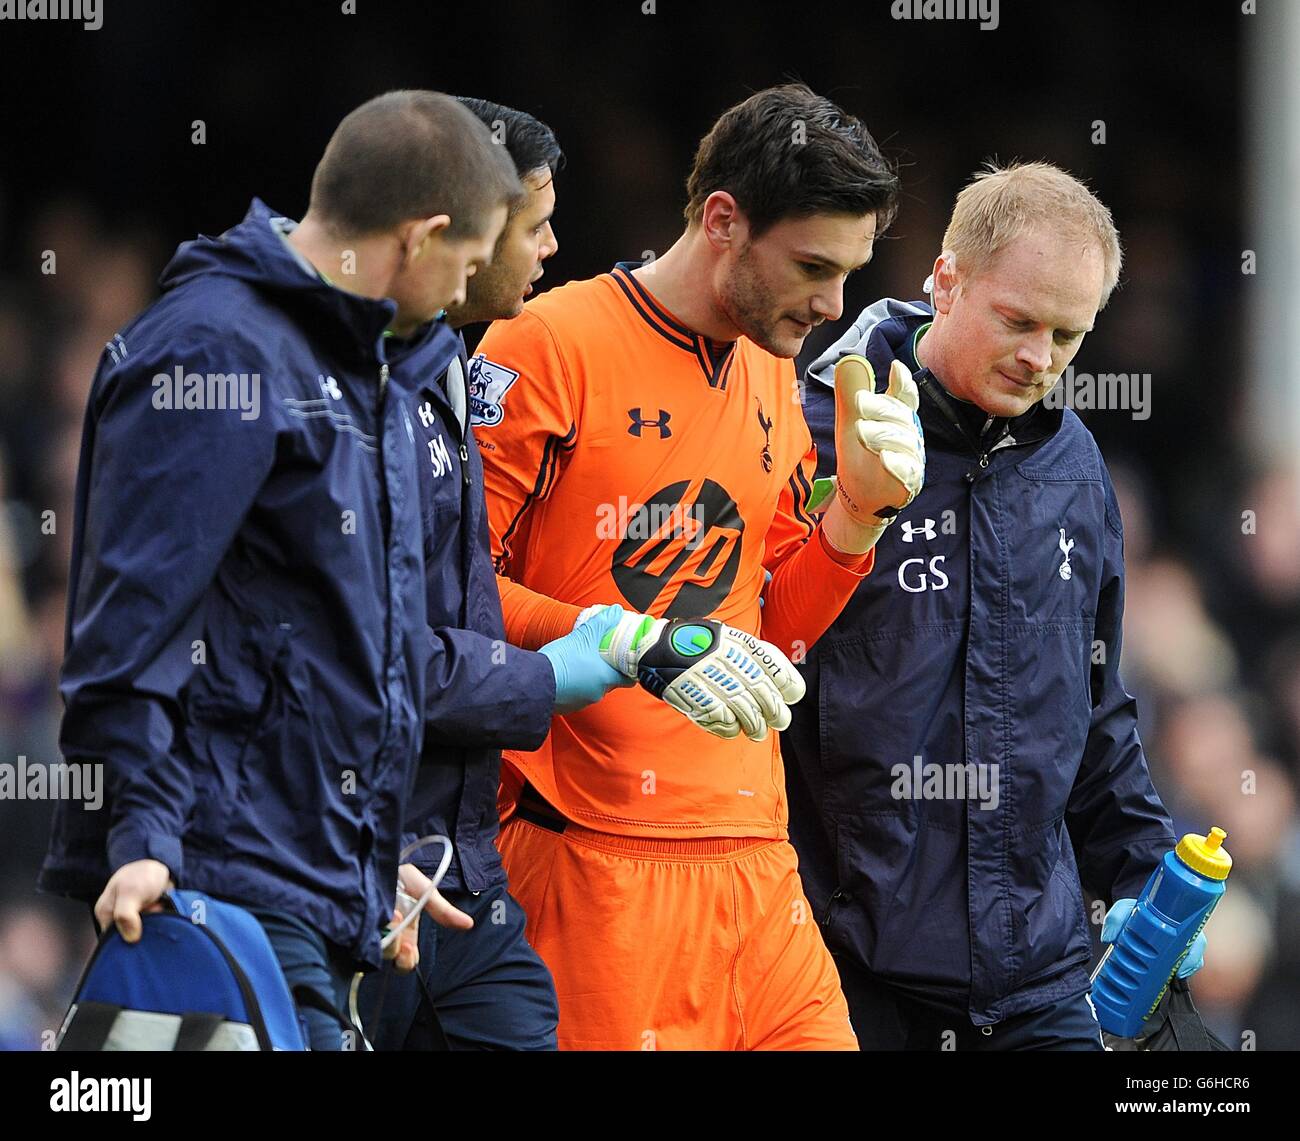 Soccer - Barclays Premier League - Everton v Tottenham Hotspur - Goodison Park. Tottenham Hotspur goalkeeper Hugo Lloris is escorted off the pitch after a collission with Everton's Romelu Lukaku (not in picture) Stock Photo